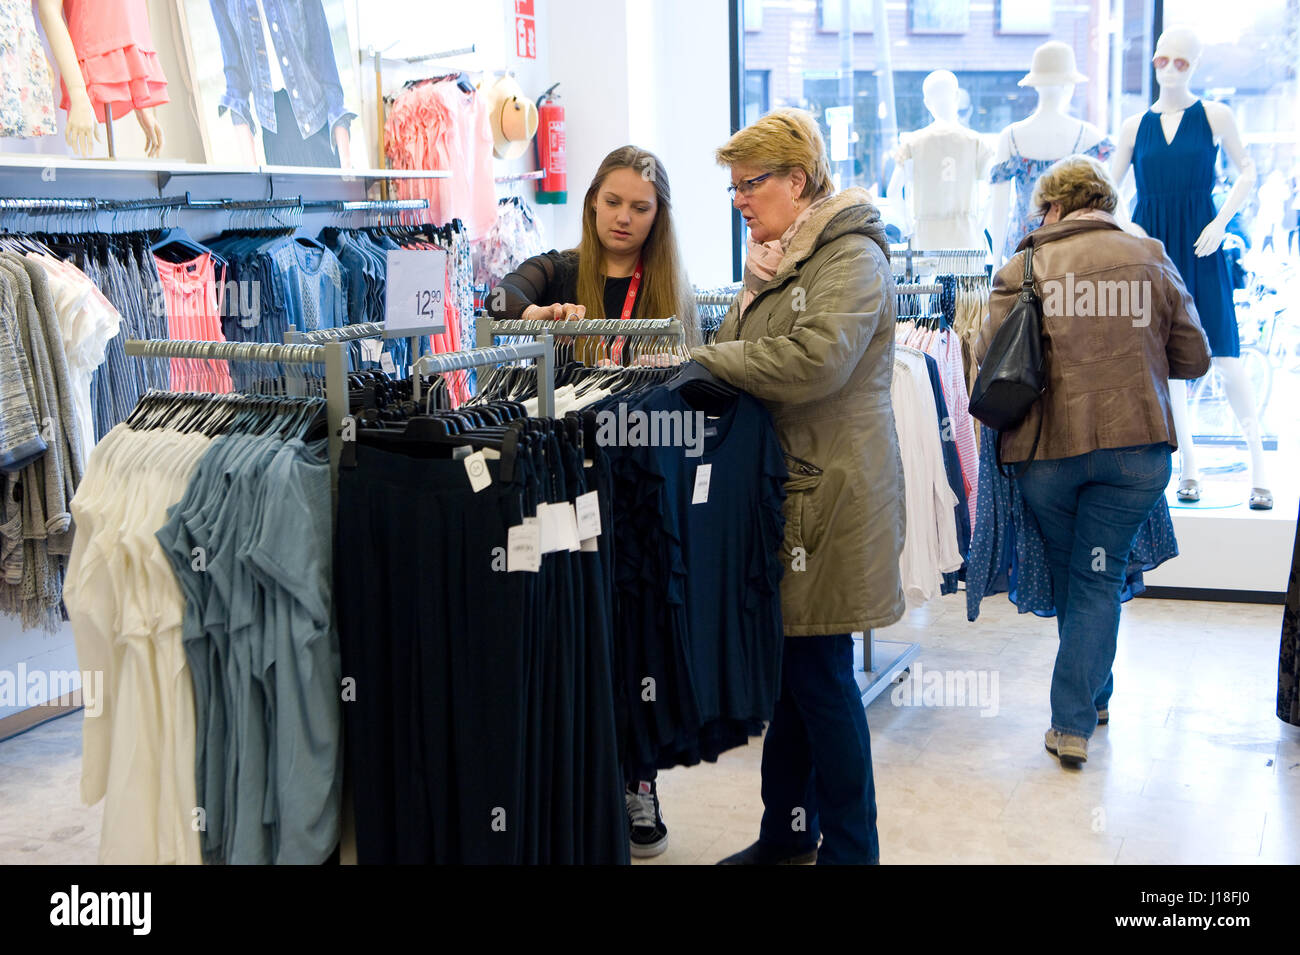 ENSCHEDE, THE NETHERLANDS - APRIL 13, 2017: Women are shopping in clothes store C&A after it has been reopened. Stock Photo